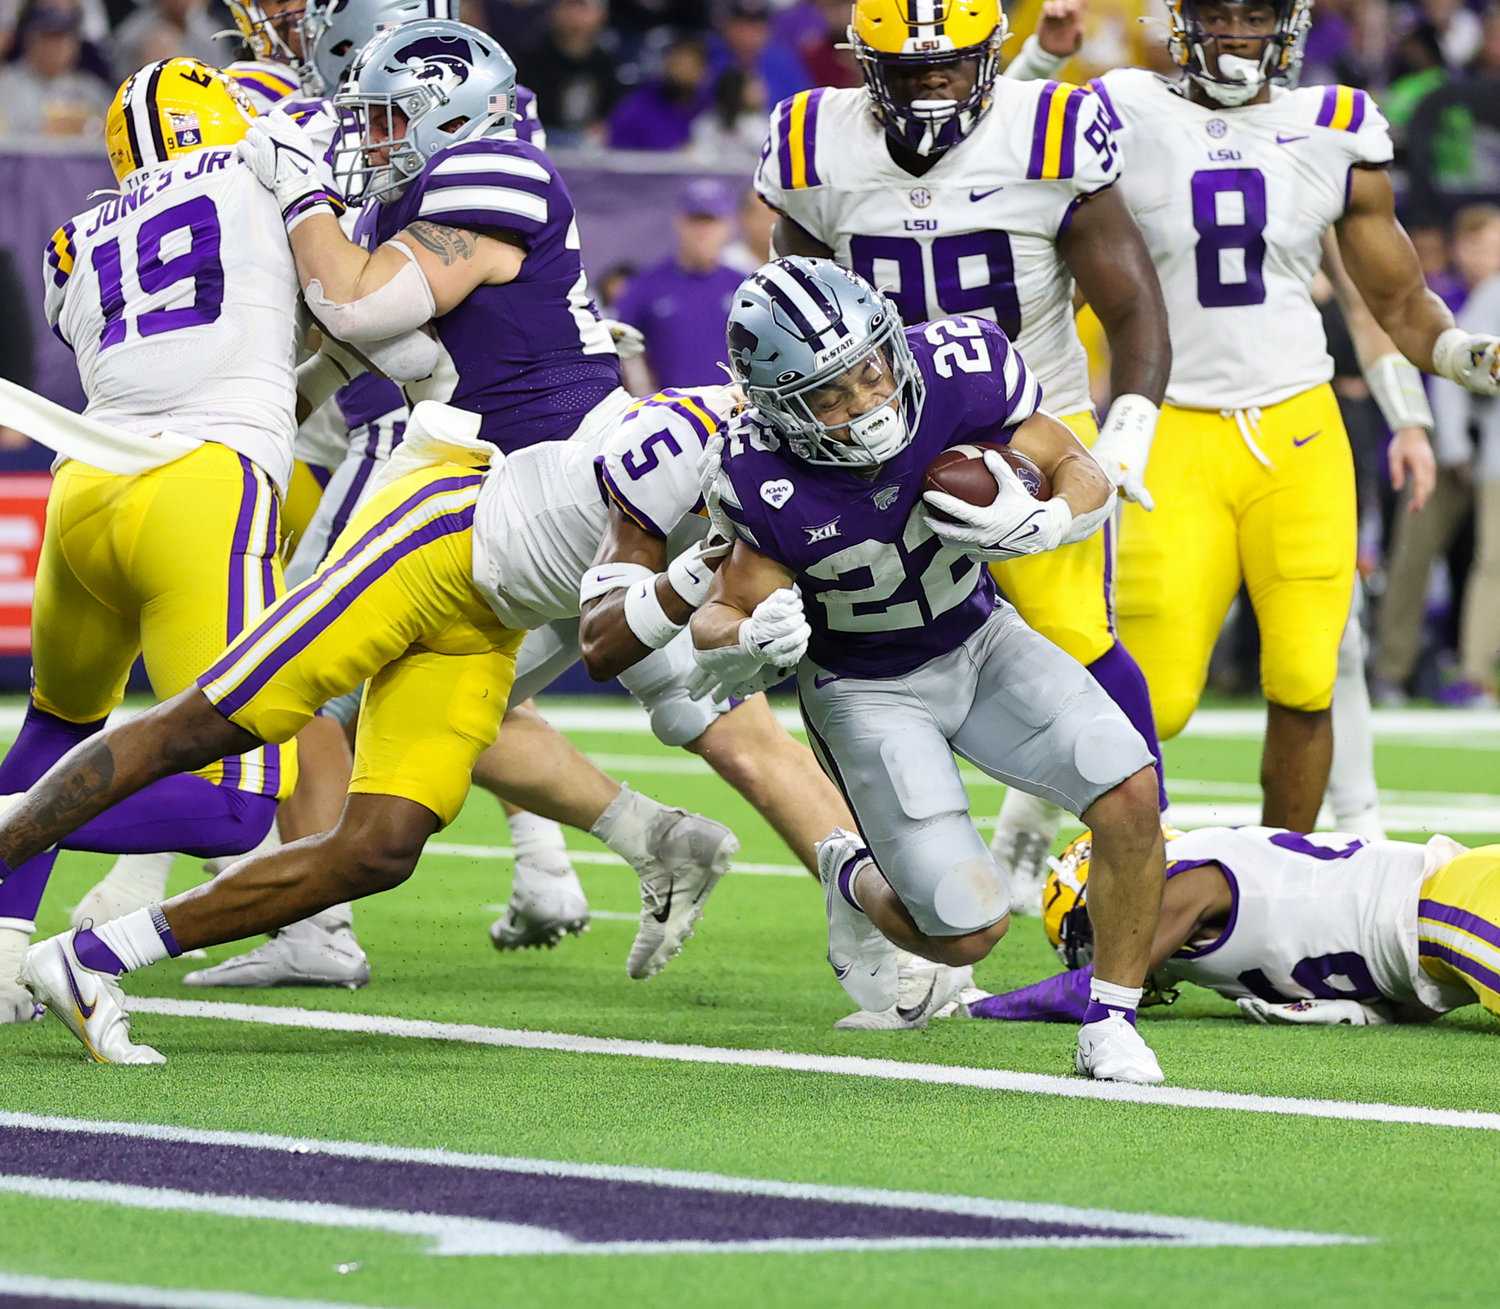 Kansas State Wildcats running back Deuce Vaughn (22) carries the ball into the end zone for a touchdown during the TaxAct Texas Bowl on Jan. 4, 2022 in Houston, Texas.